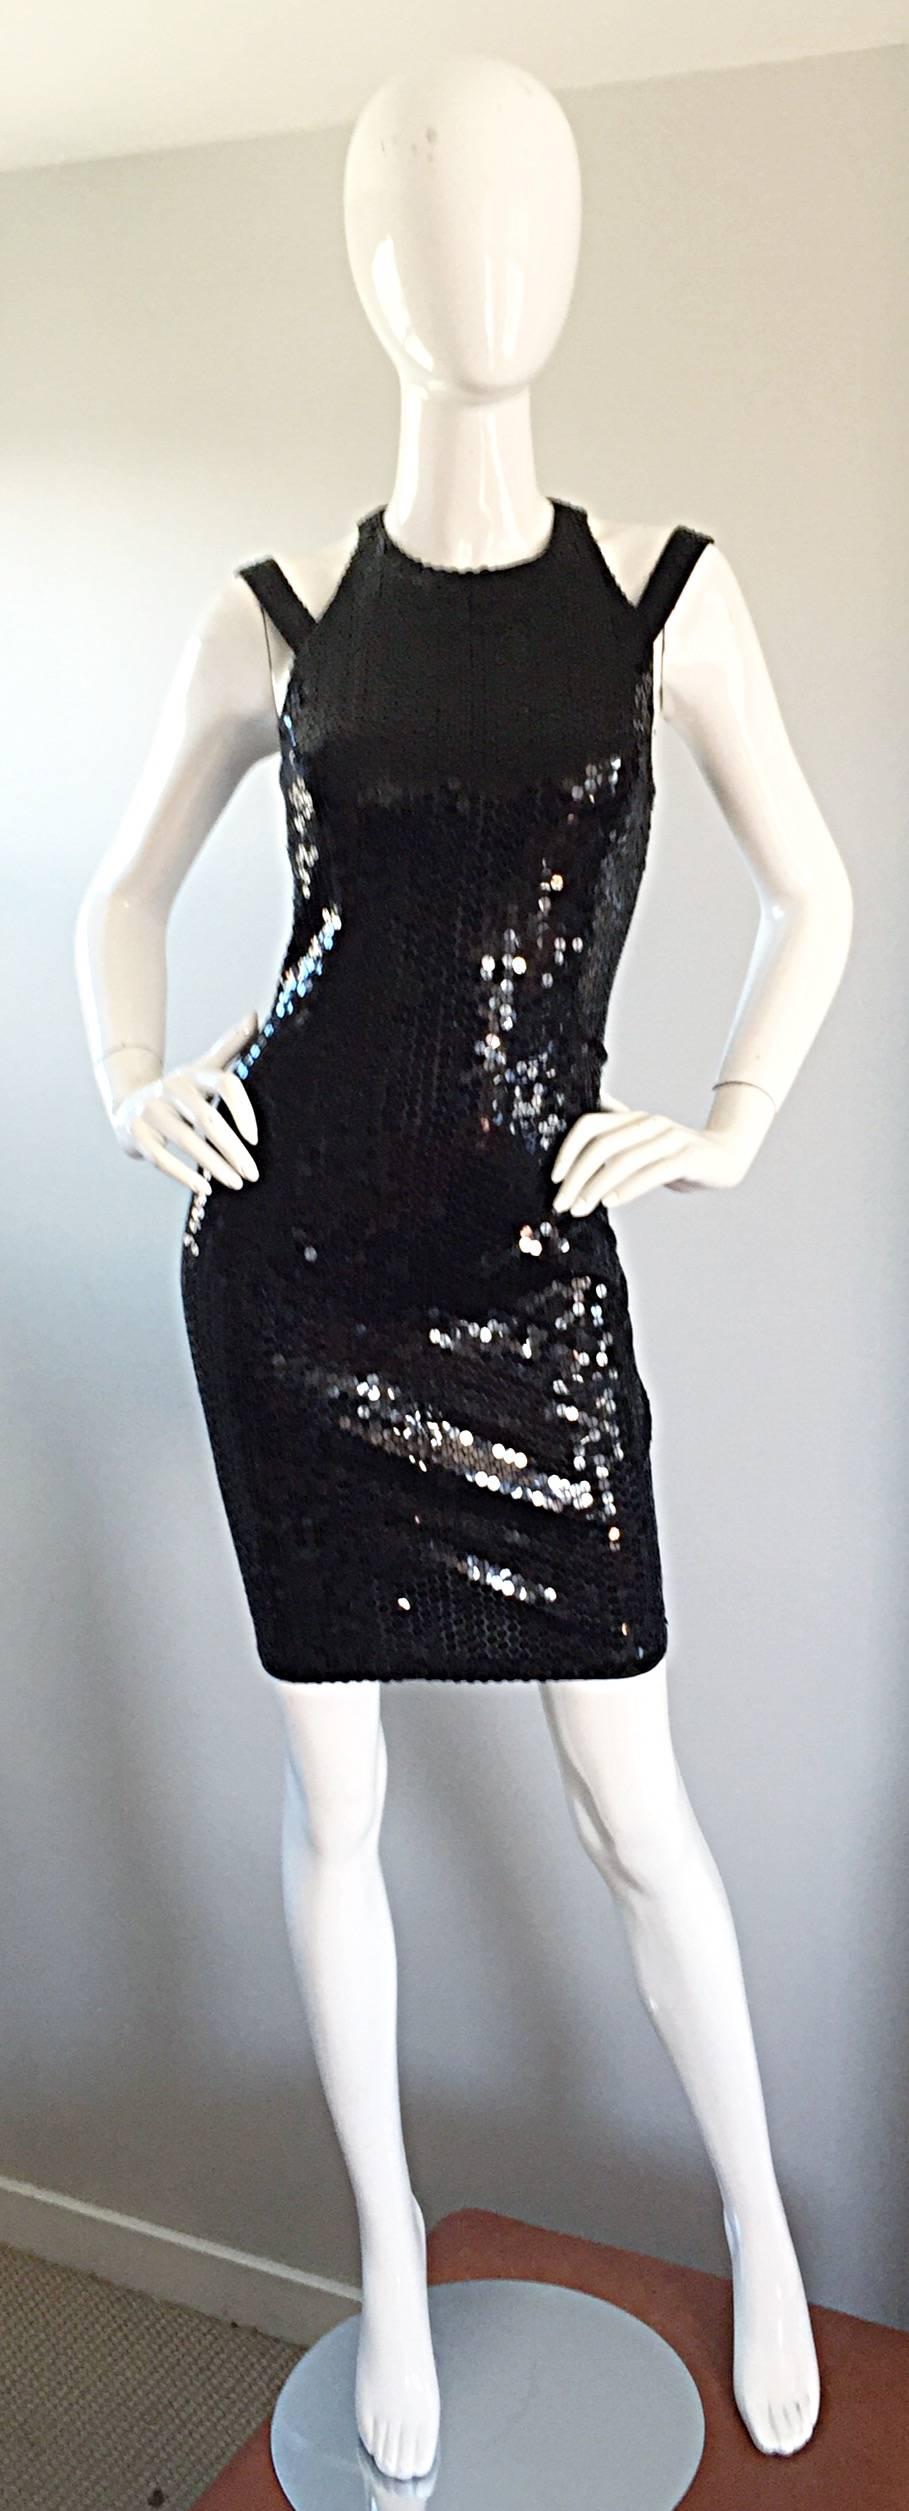 Sexiest vintage DELLA ROUFGALI black sequined caged back 1990s Bodycon mini dress! Features thousands of hand-sewn black sequins throughout the entire dress. Crisscross caged back reveals just the right amount of skin. Such a flattering dress that